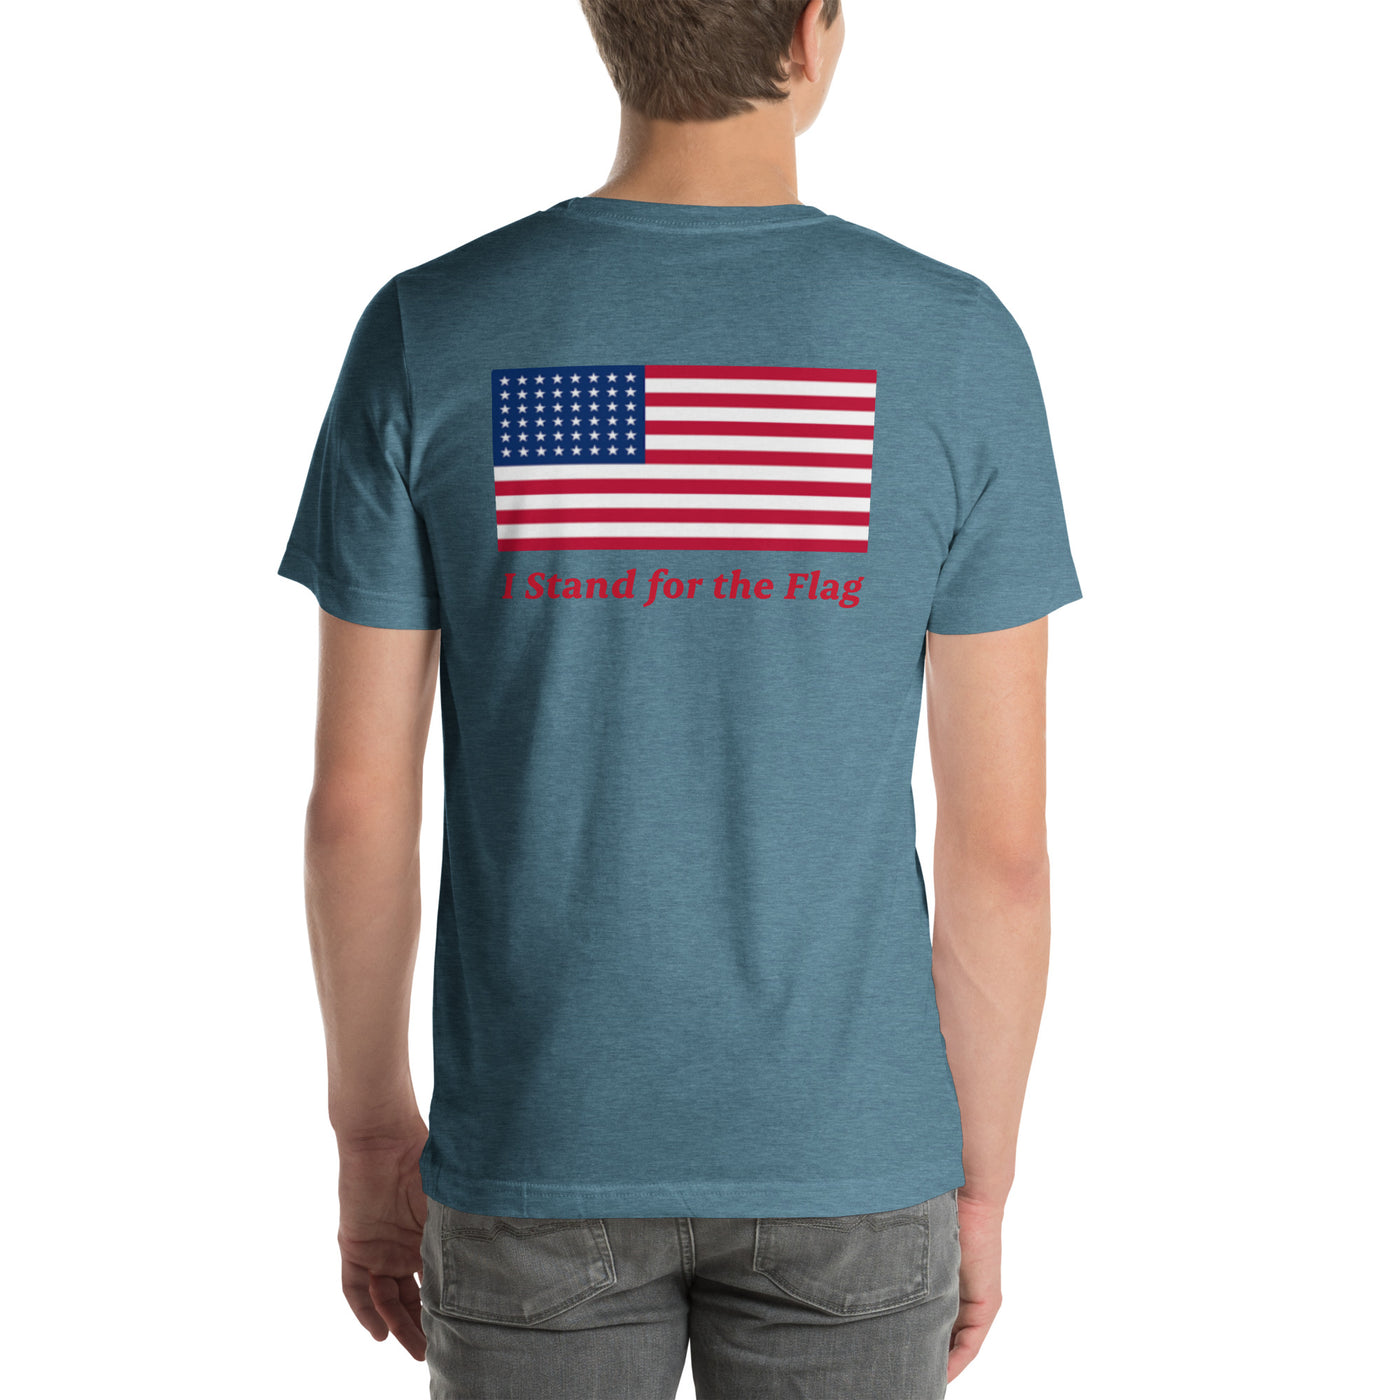 I Stand for the Flag - Unisex t-shirt